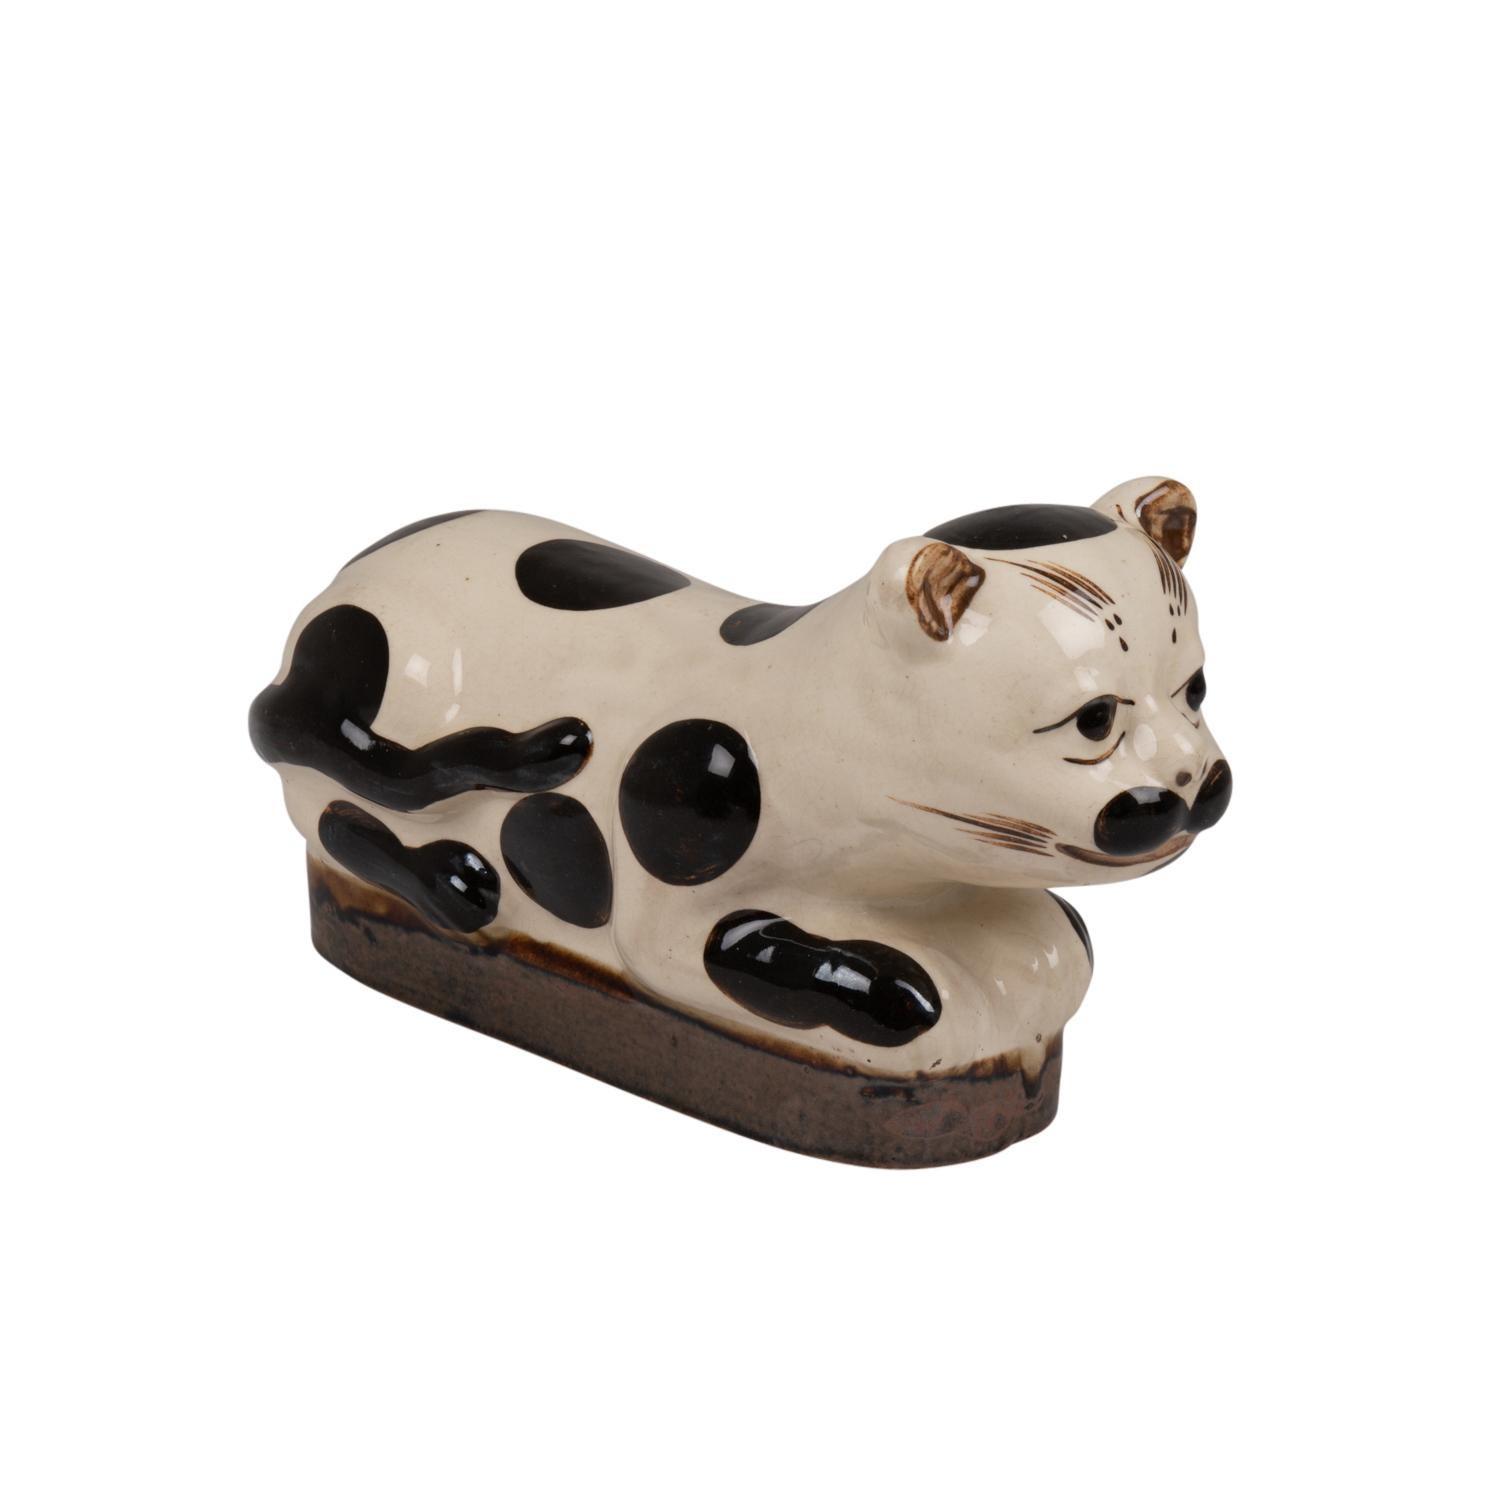 Ceramic representing a seated cat of rectangular shape and white and black, spotted.

Chinese work realized circa 1900.